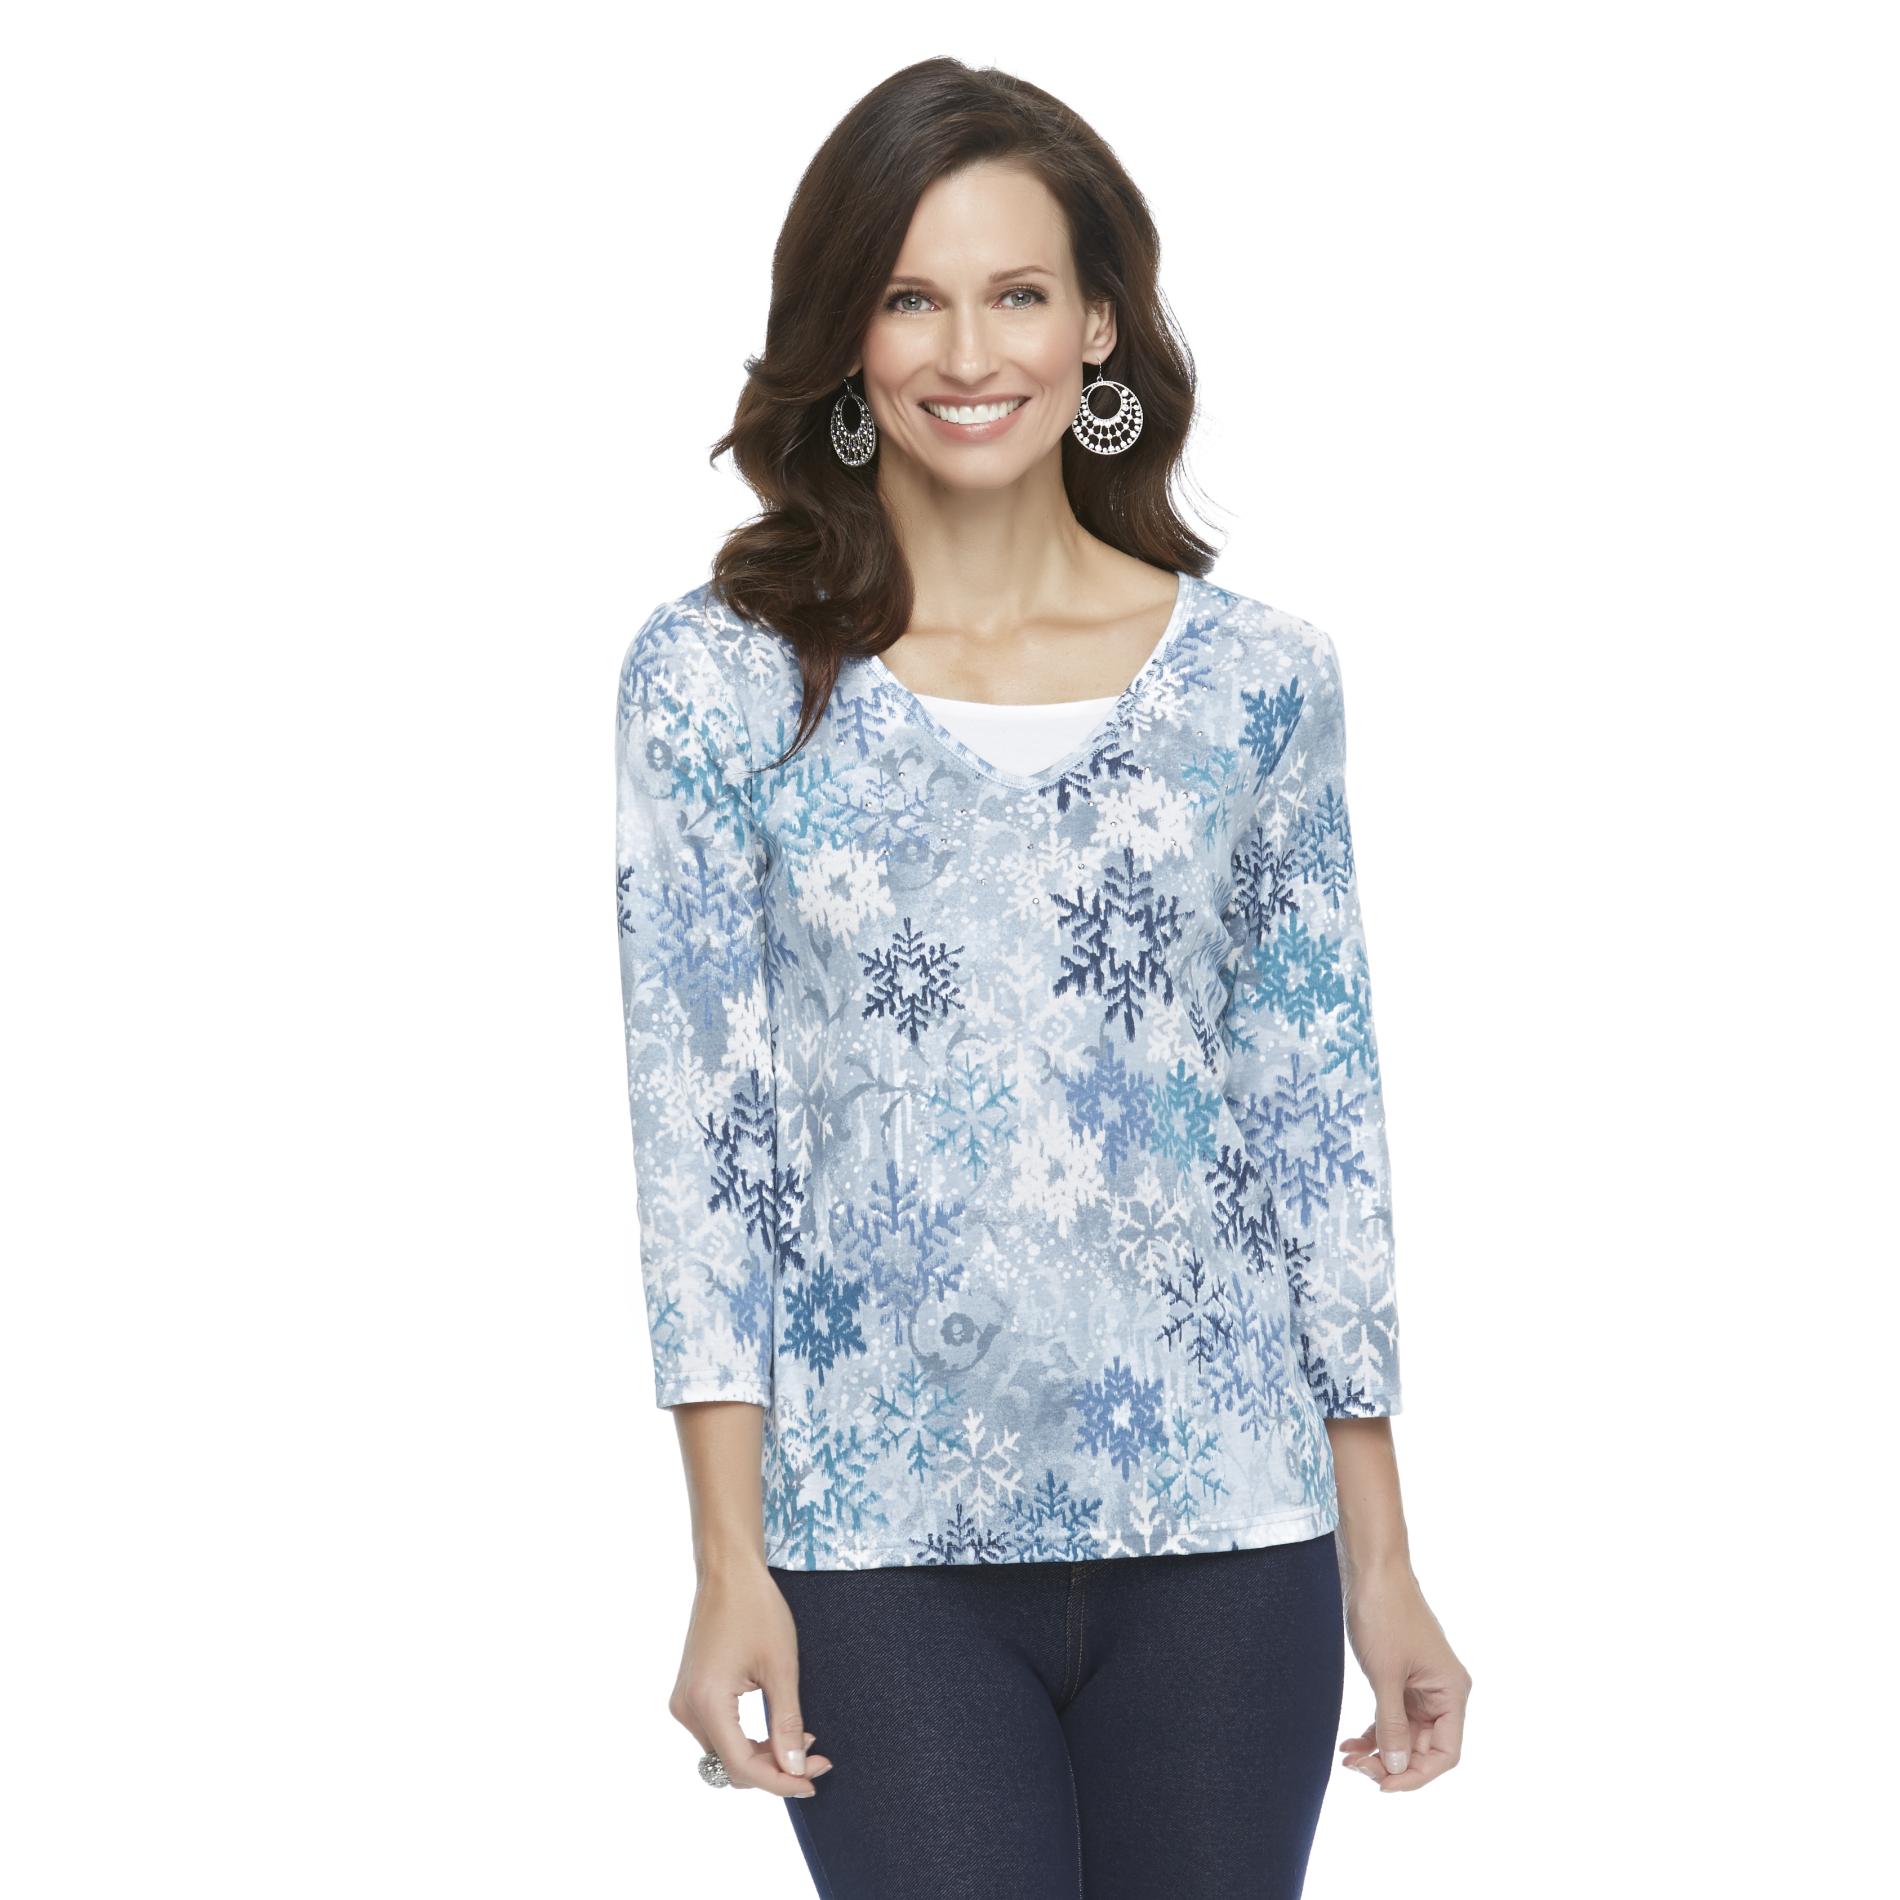 Basic Editions Women's Studded Knit Top - Floral